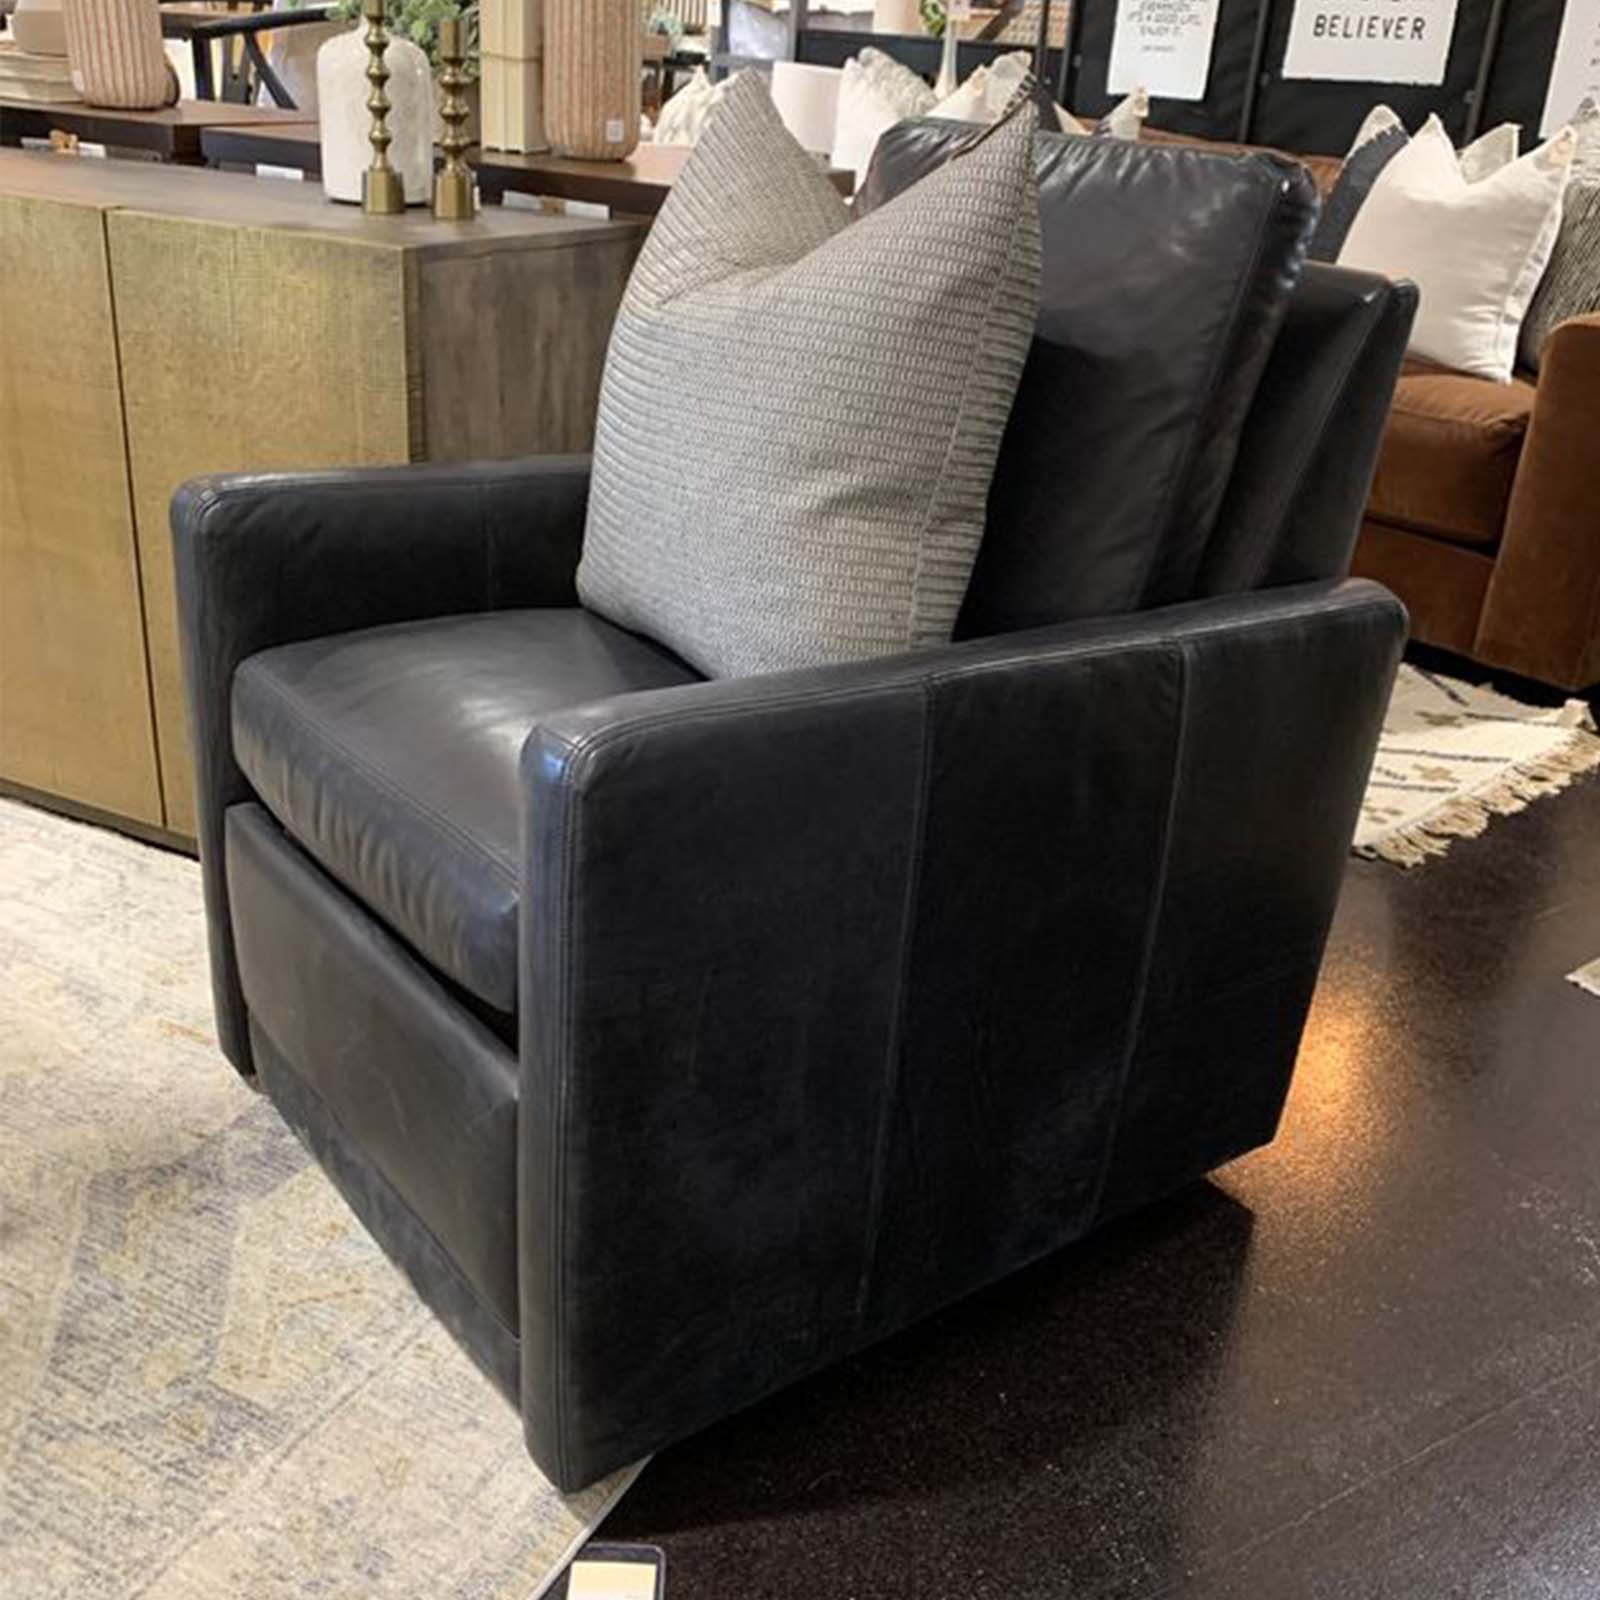 Gehrig Relaxor Swivel Chair